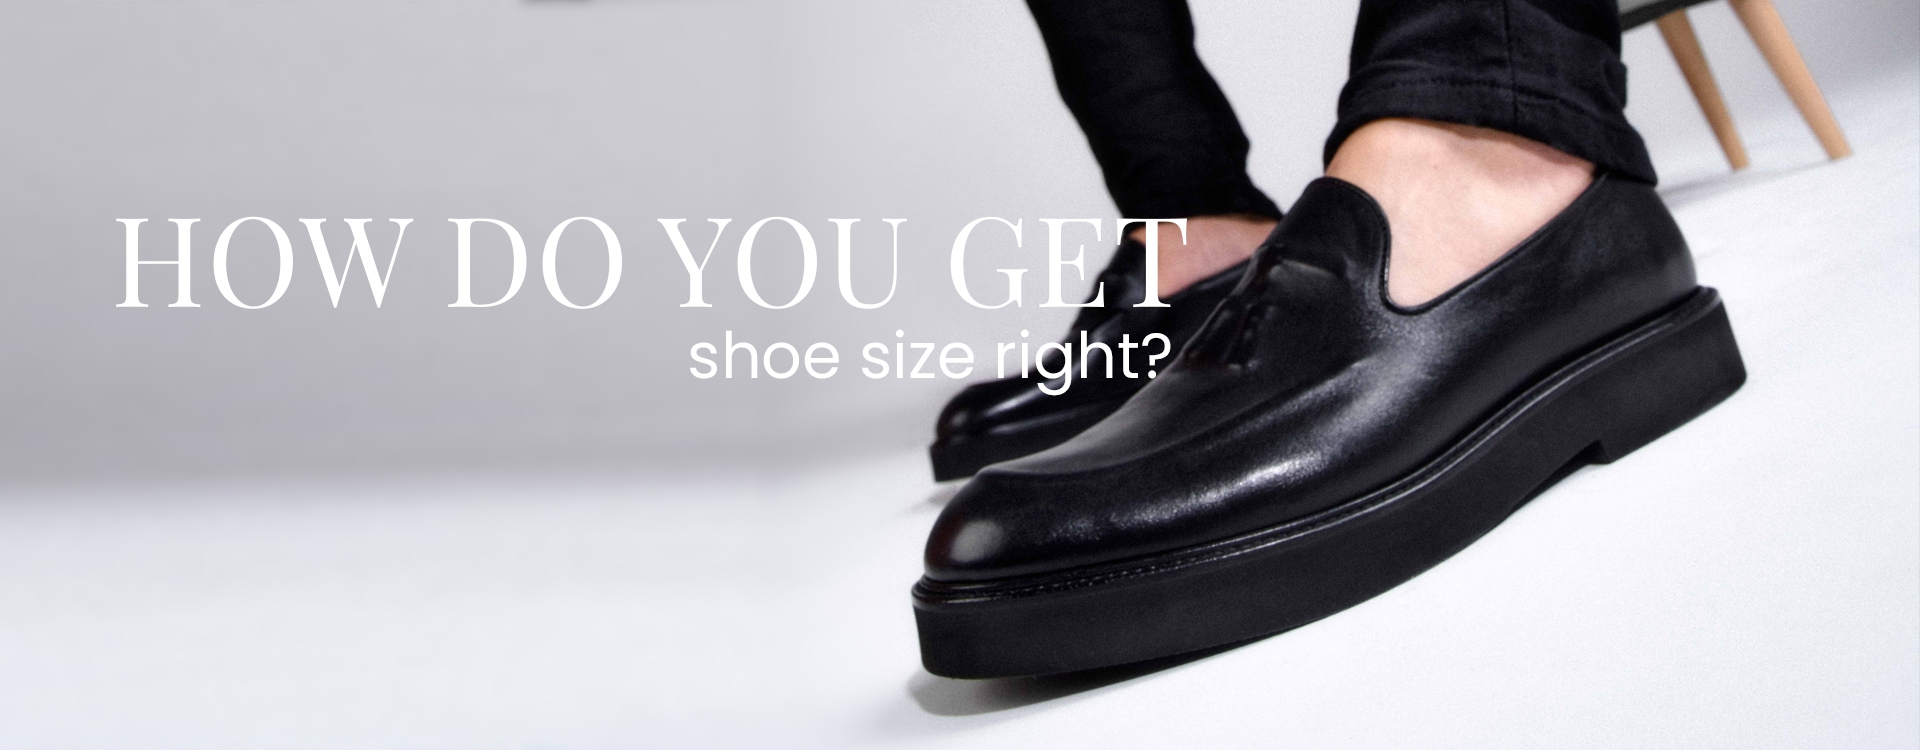 How do you get shoe size right?